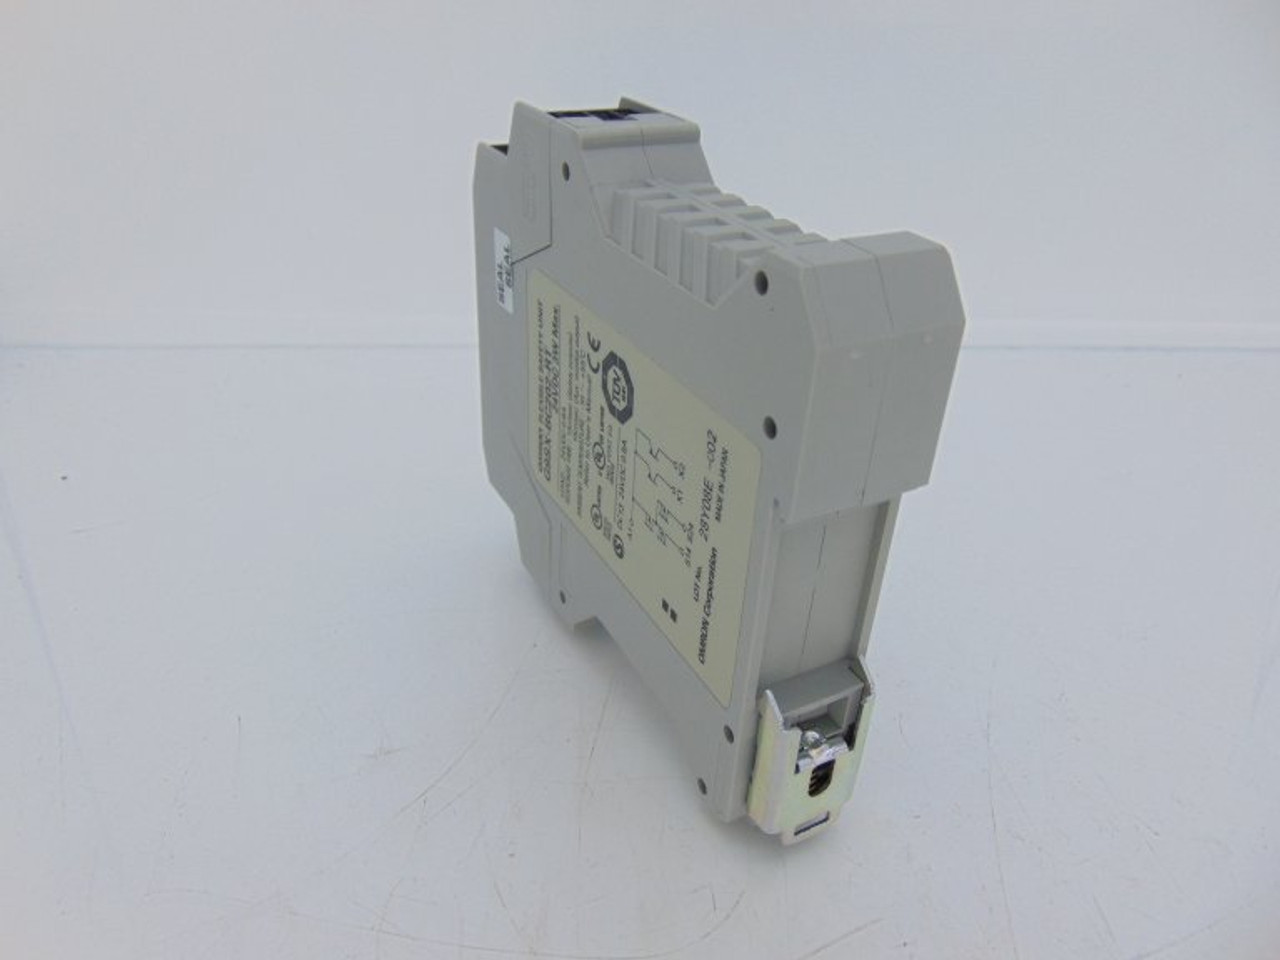 New IN BOX safety relay G9SX-AD322-T15-RT 24VDC year warranty - 2